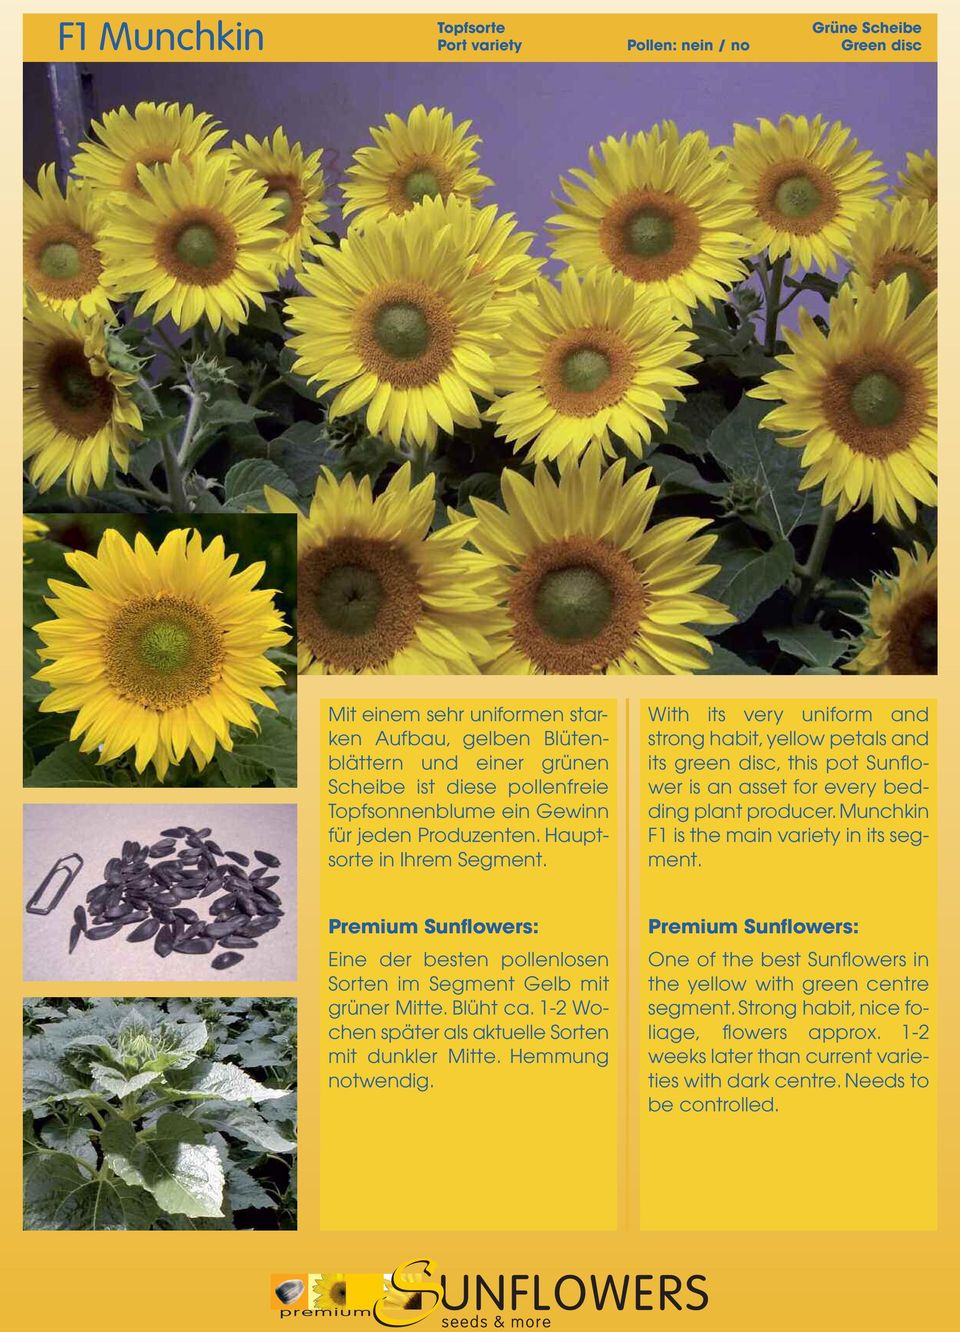 With its very uniform and strong habit, yellow petals and its green disc, this pot Sunflower is an asset for every bedding plant producer. Munchkin F1 is the main variety in its segment.